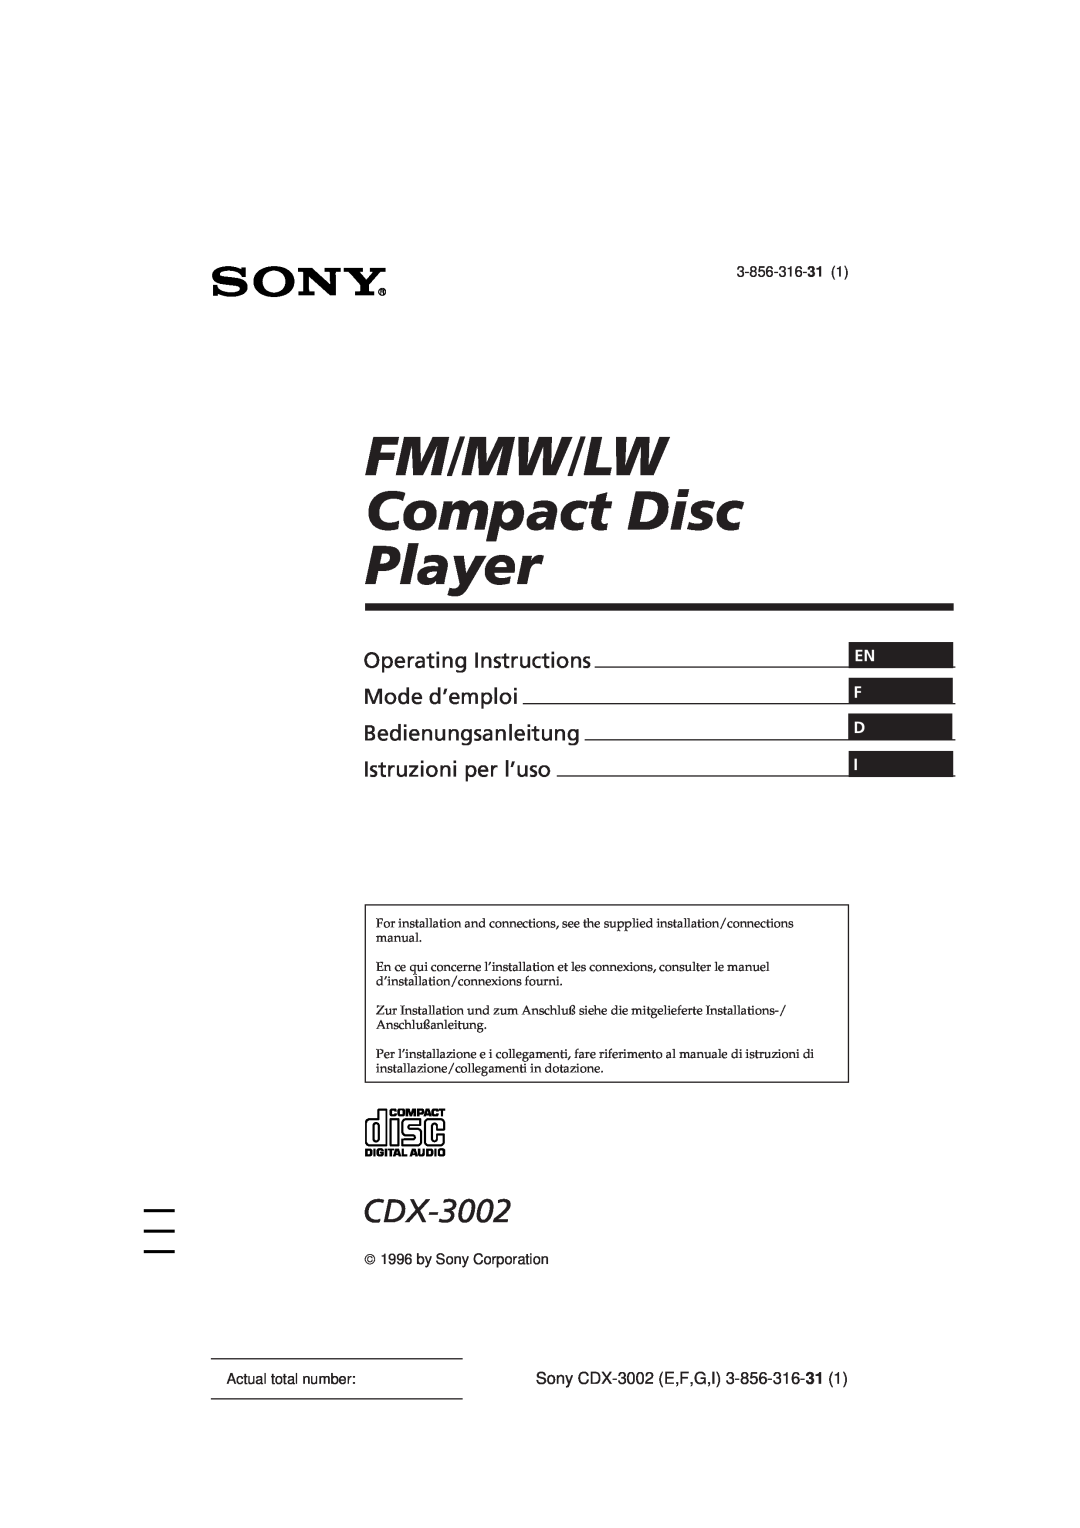 Sony CDX-3002 FM/MW/LW Compact Disc Player, Operating Instructions Mode d’emploi, Bedienungsanleitung Istruzioni per l’uso 